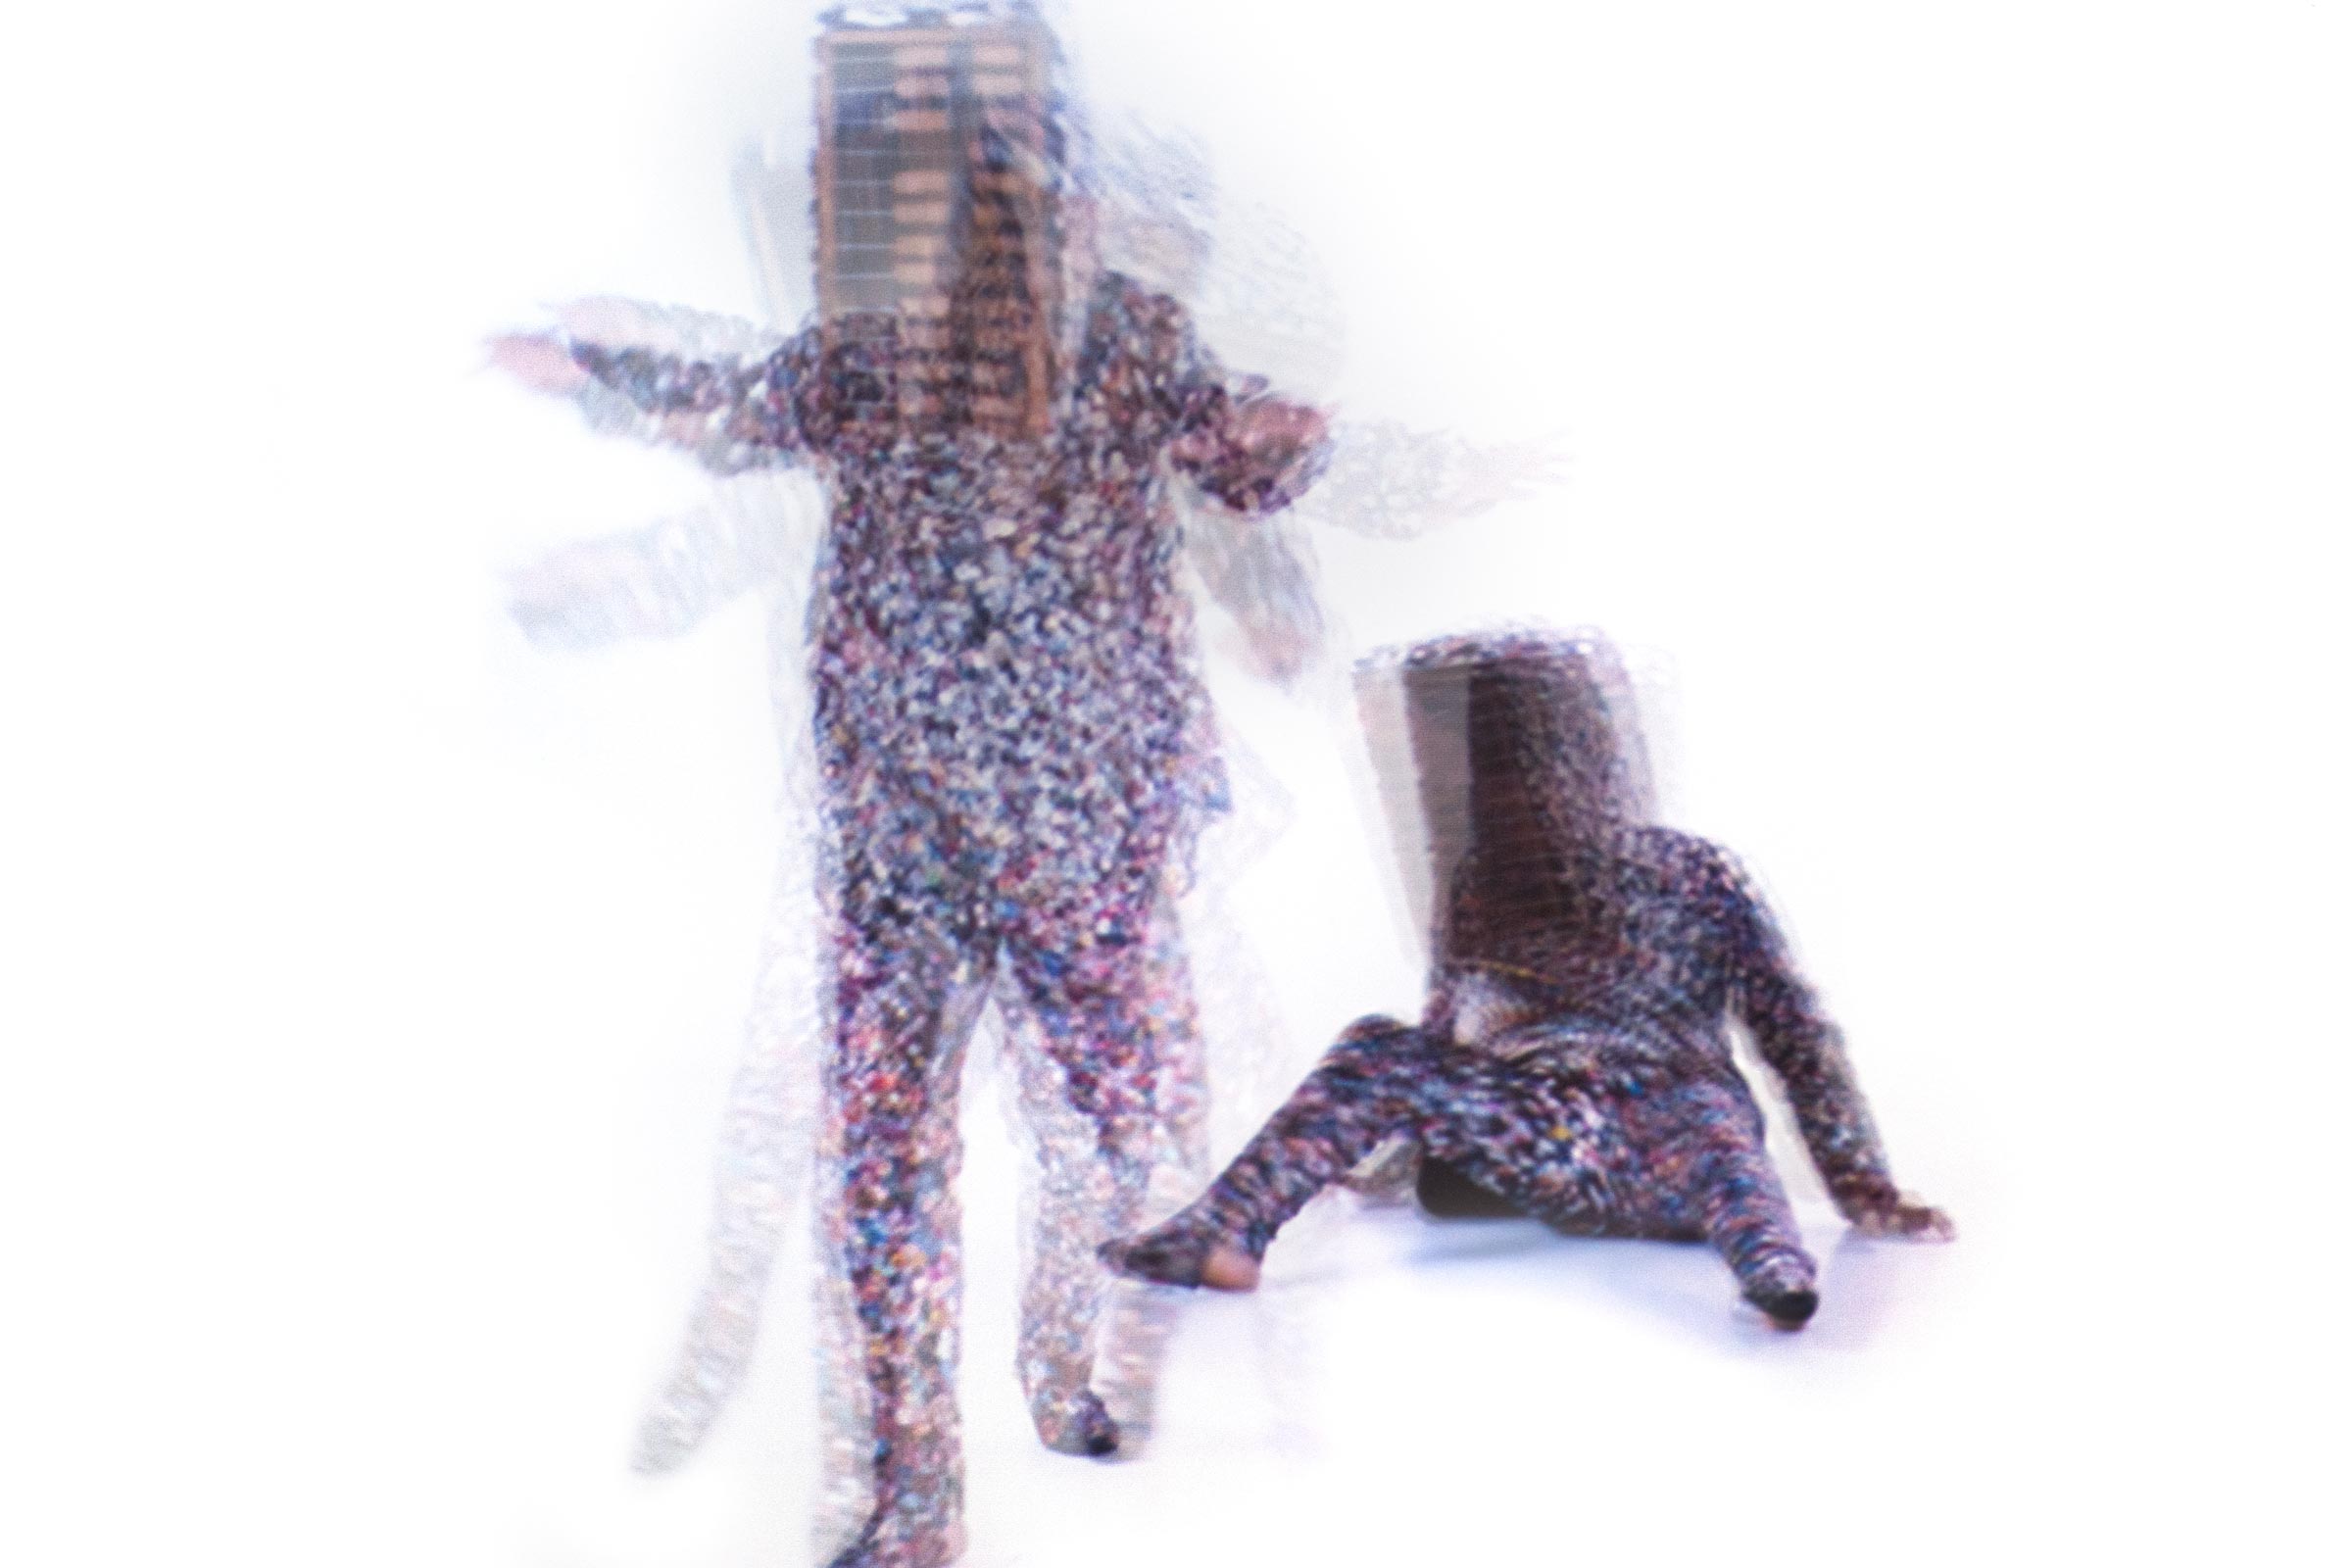 Blurry image of two people moving.  one is standing and one looks like they fell down